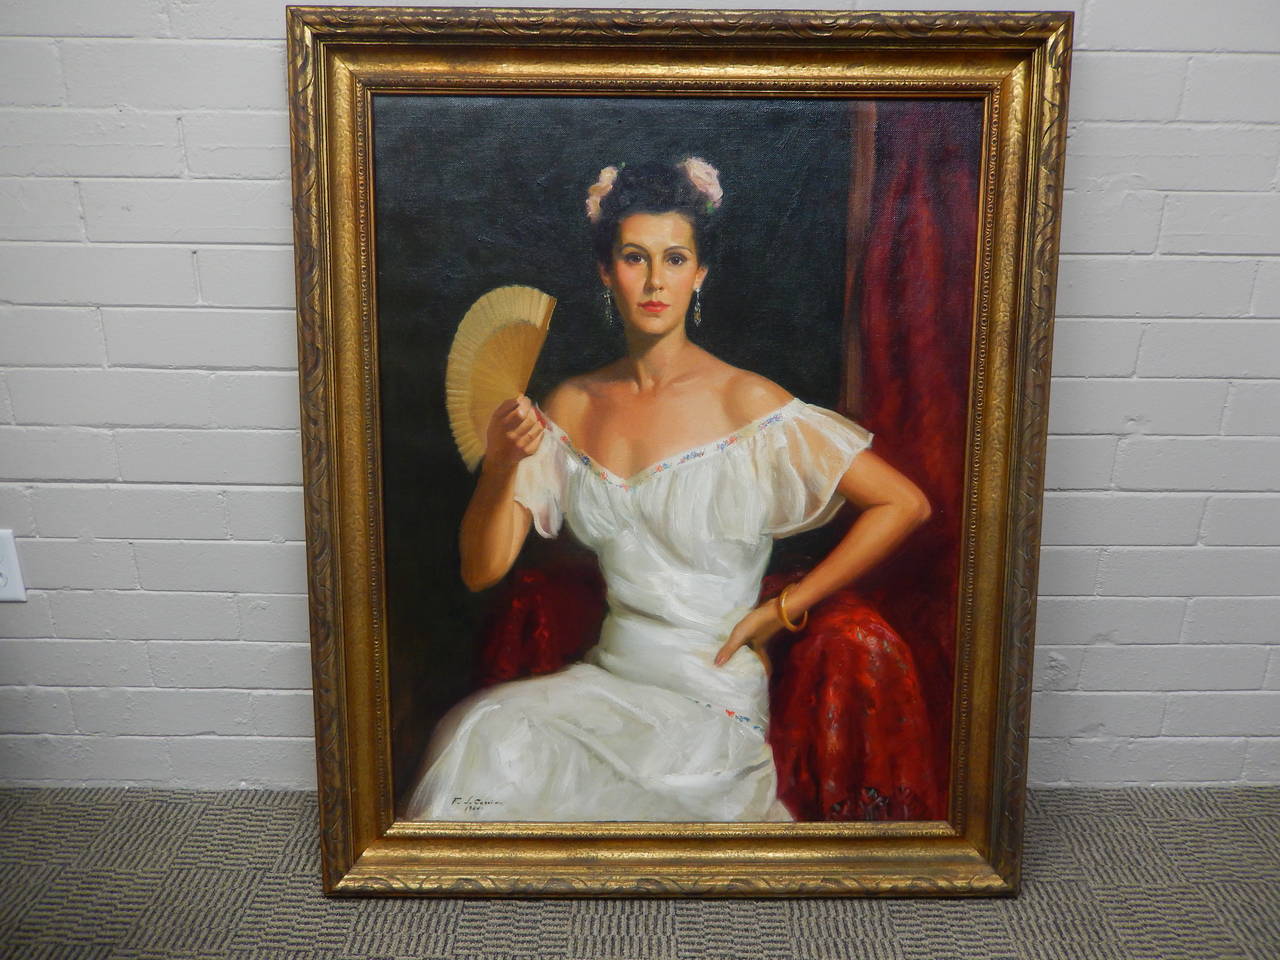 Lovely portrait of a woman by Felix de Cossio, signed and dated 1944. 

Felix de Cossio was a noted Cuban portrait painter of the period. Other works include portraits of Betty Ford, U.A. Von, Martha Fernandez, and Miranda de Batista.